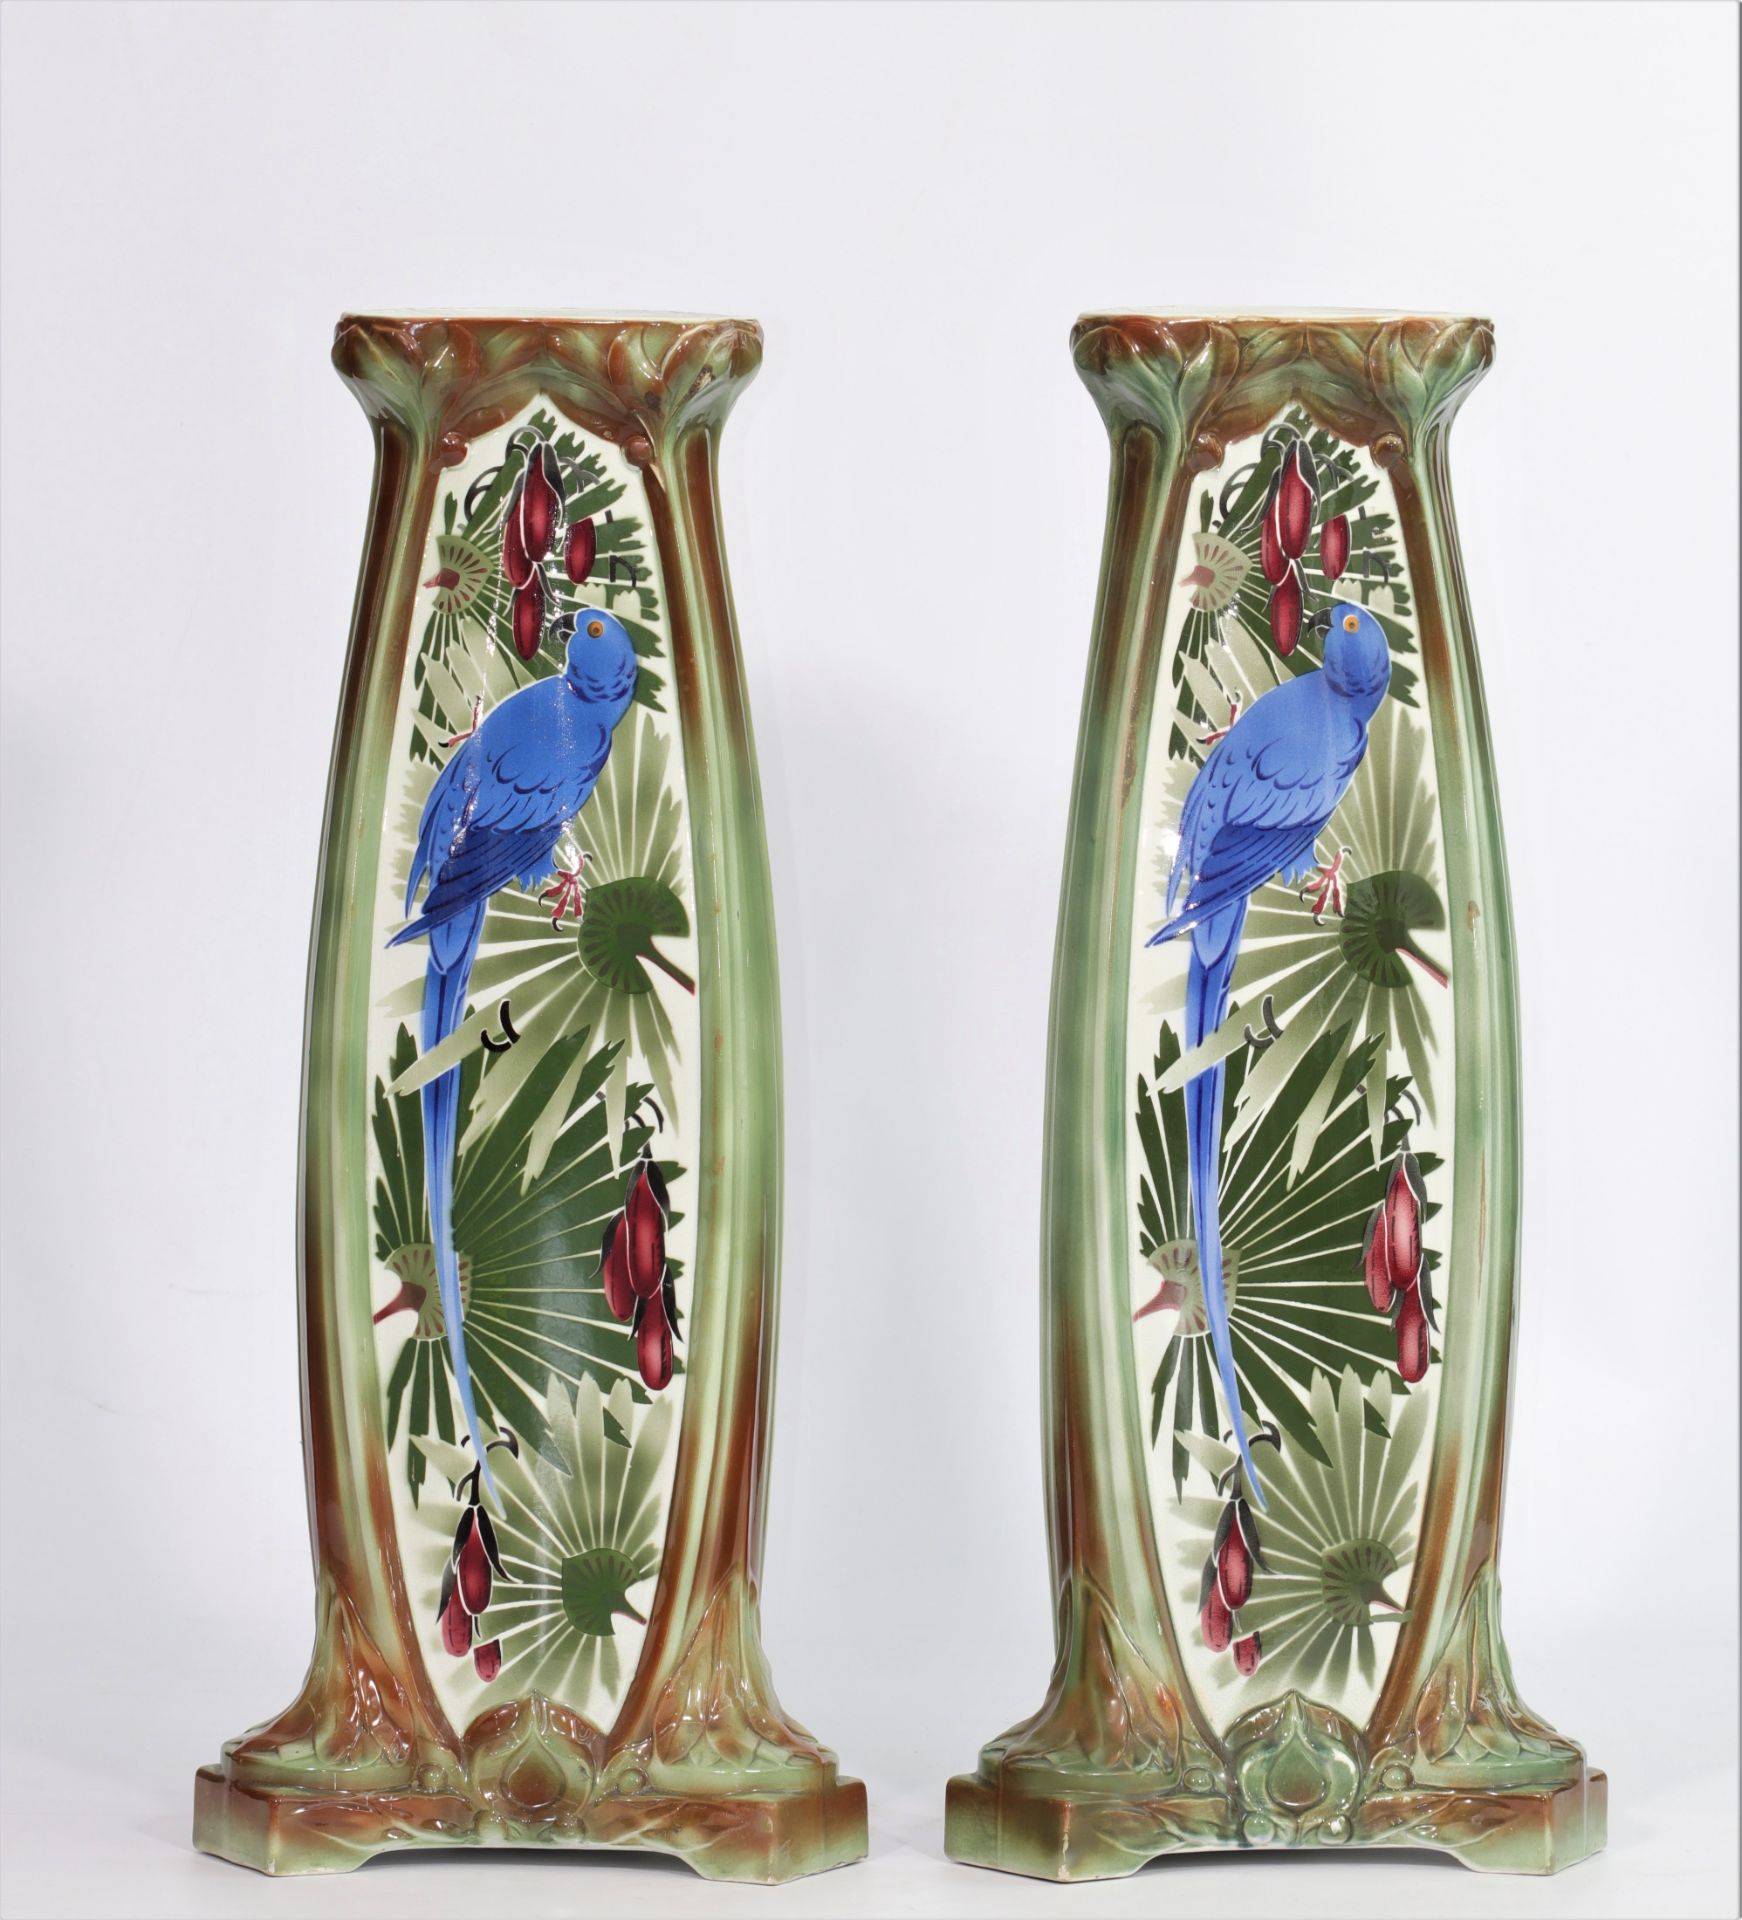 Pair of art-deco columns decorated with blue macaws, K G Luneville, signed - circa 1930